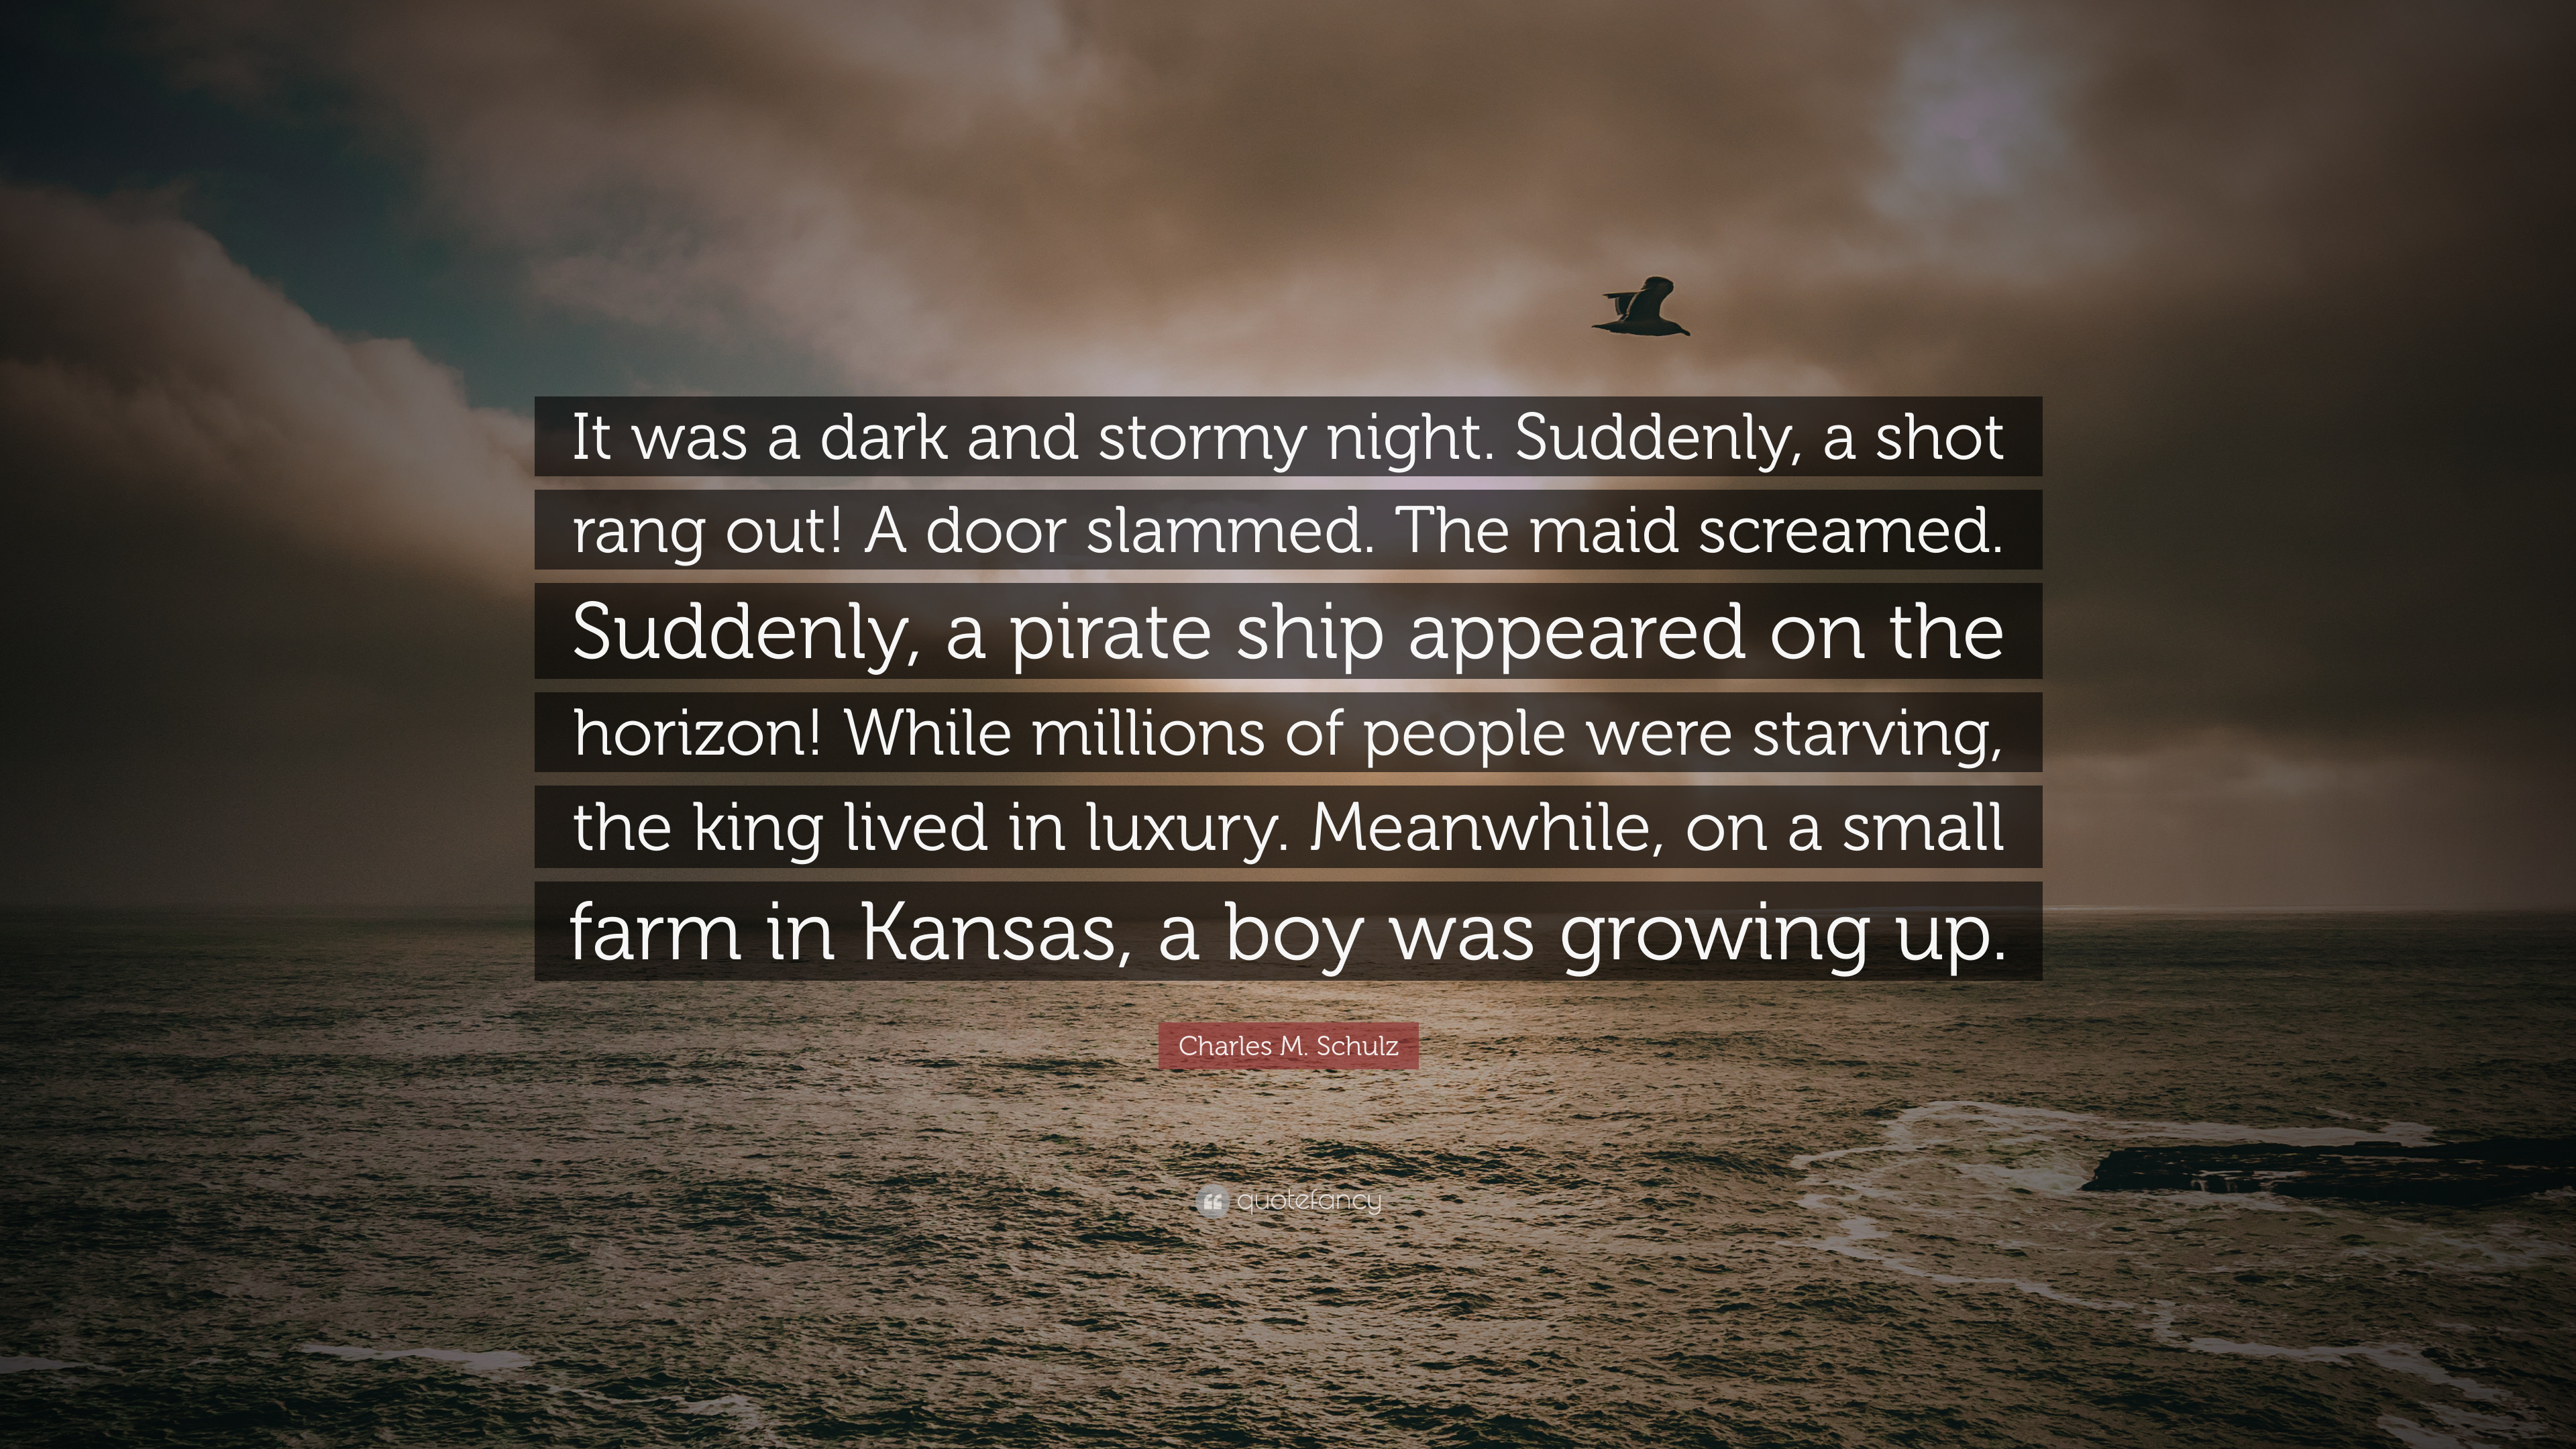 3840x2160 Charles M. Schulz Quote: “It was a dark and stormy night. Suddenly